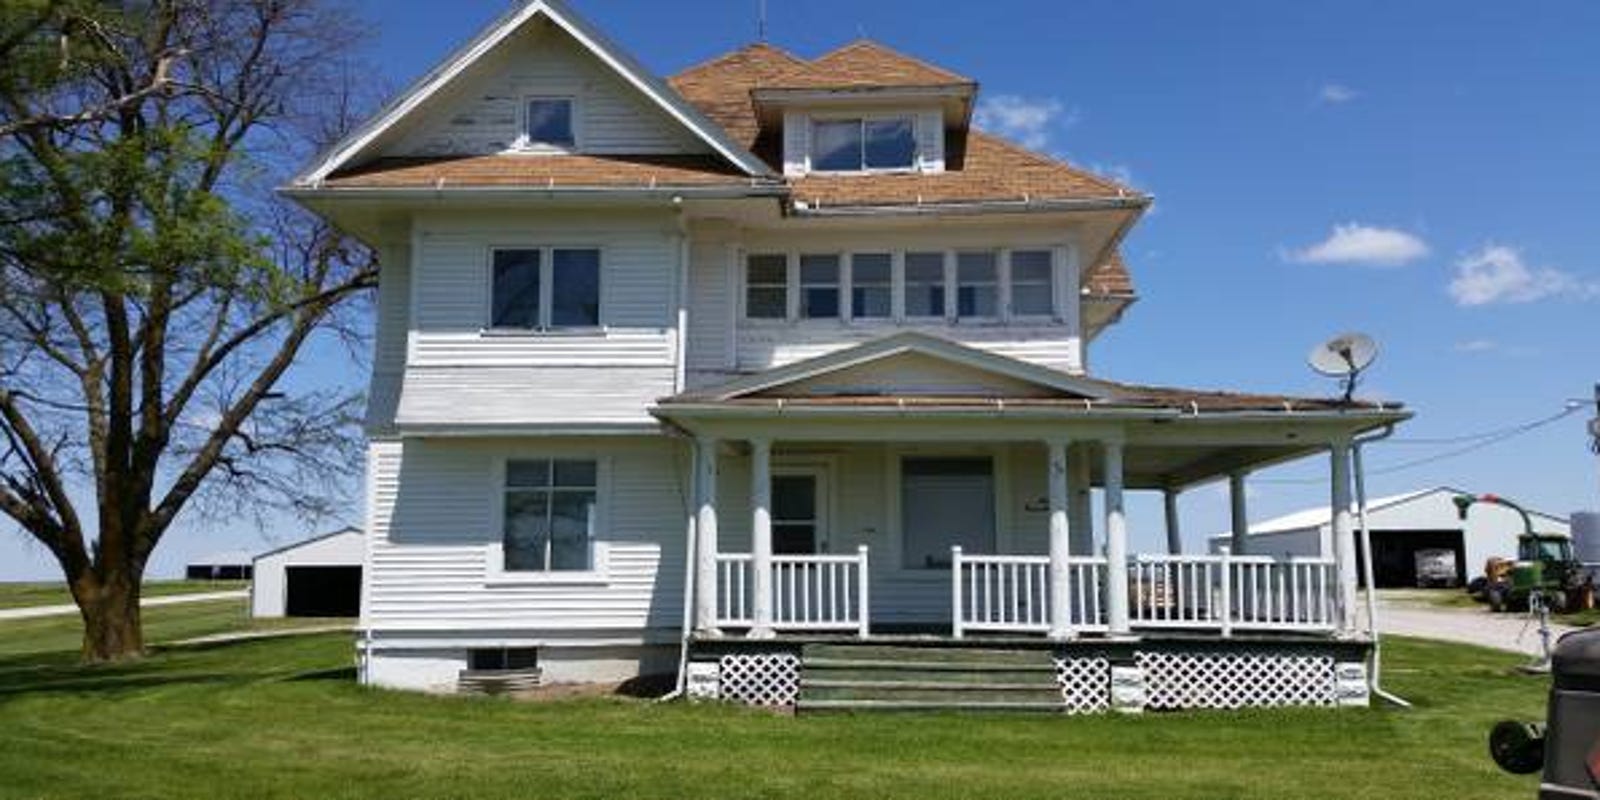 Iowa Farmhouse Offered For Free On Craigslist Finds A New Home